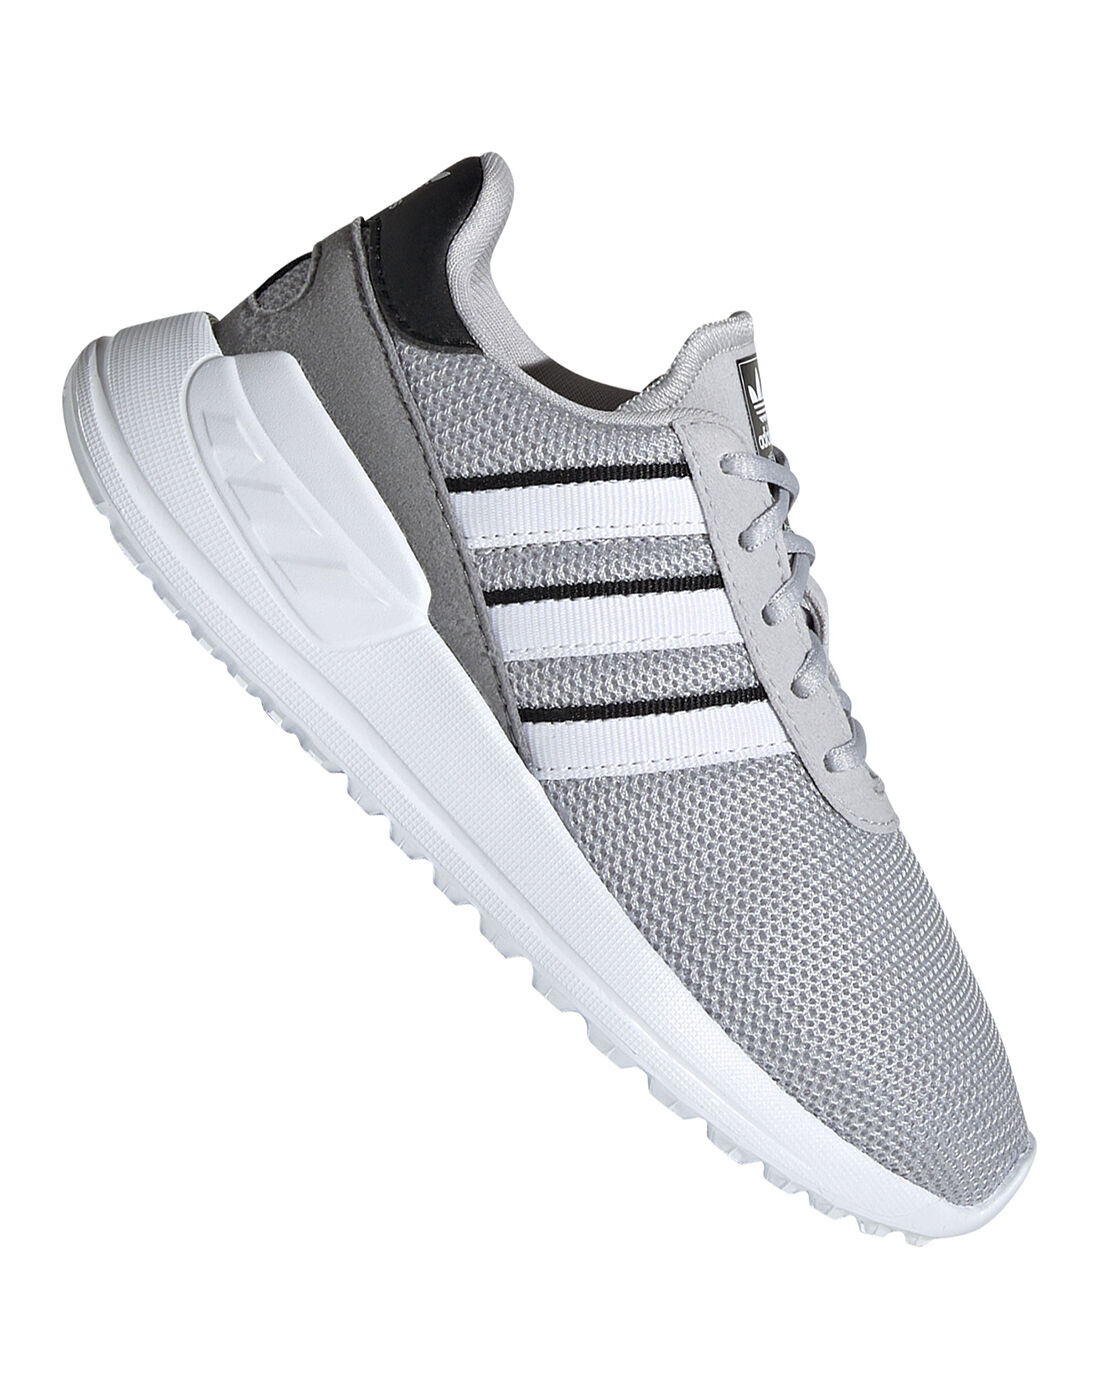 adidas store muenchen mall hours new york city | Sites-LSS-Site